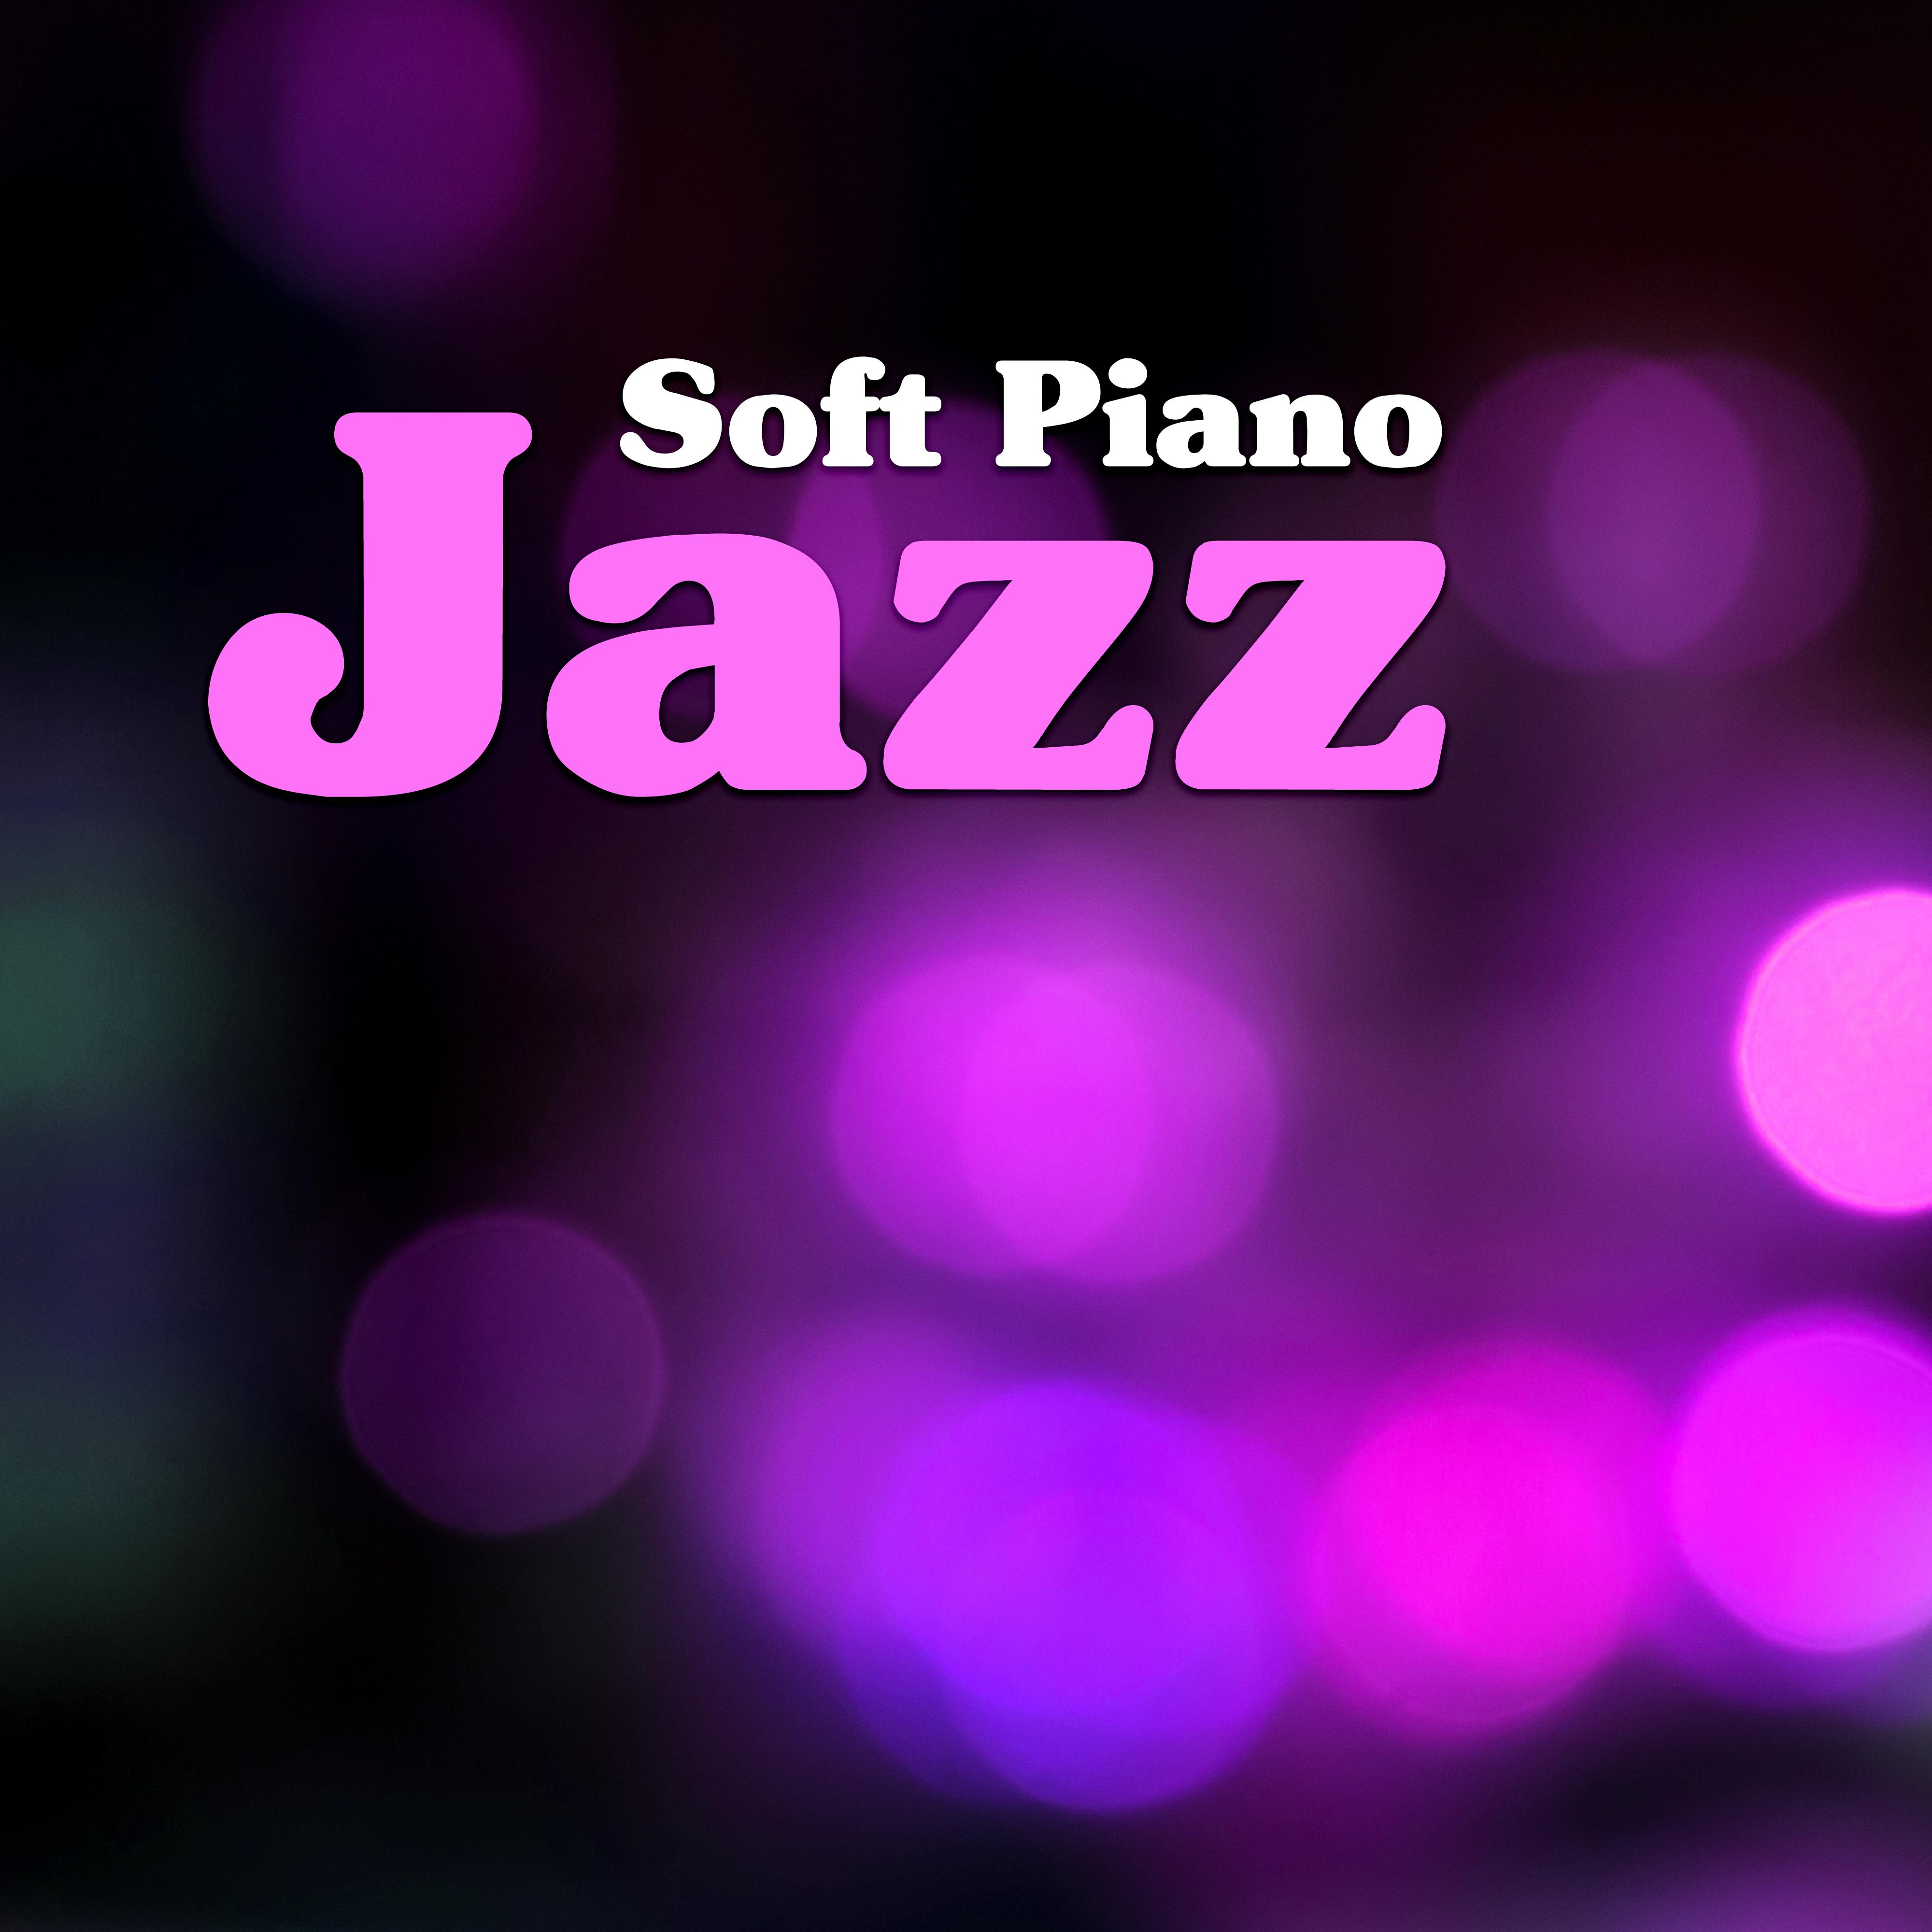 Soft Piano Jazz – Instrumental Jazz Music, Rest with Piano Melodies, Soothing Sounds to Relax